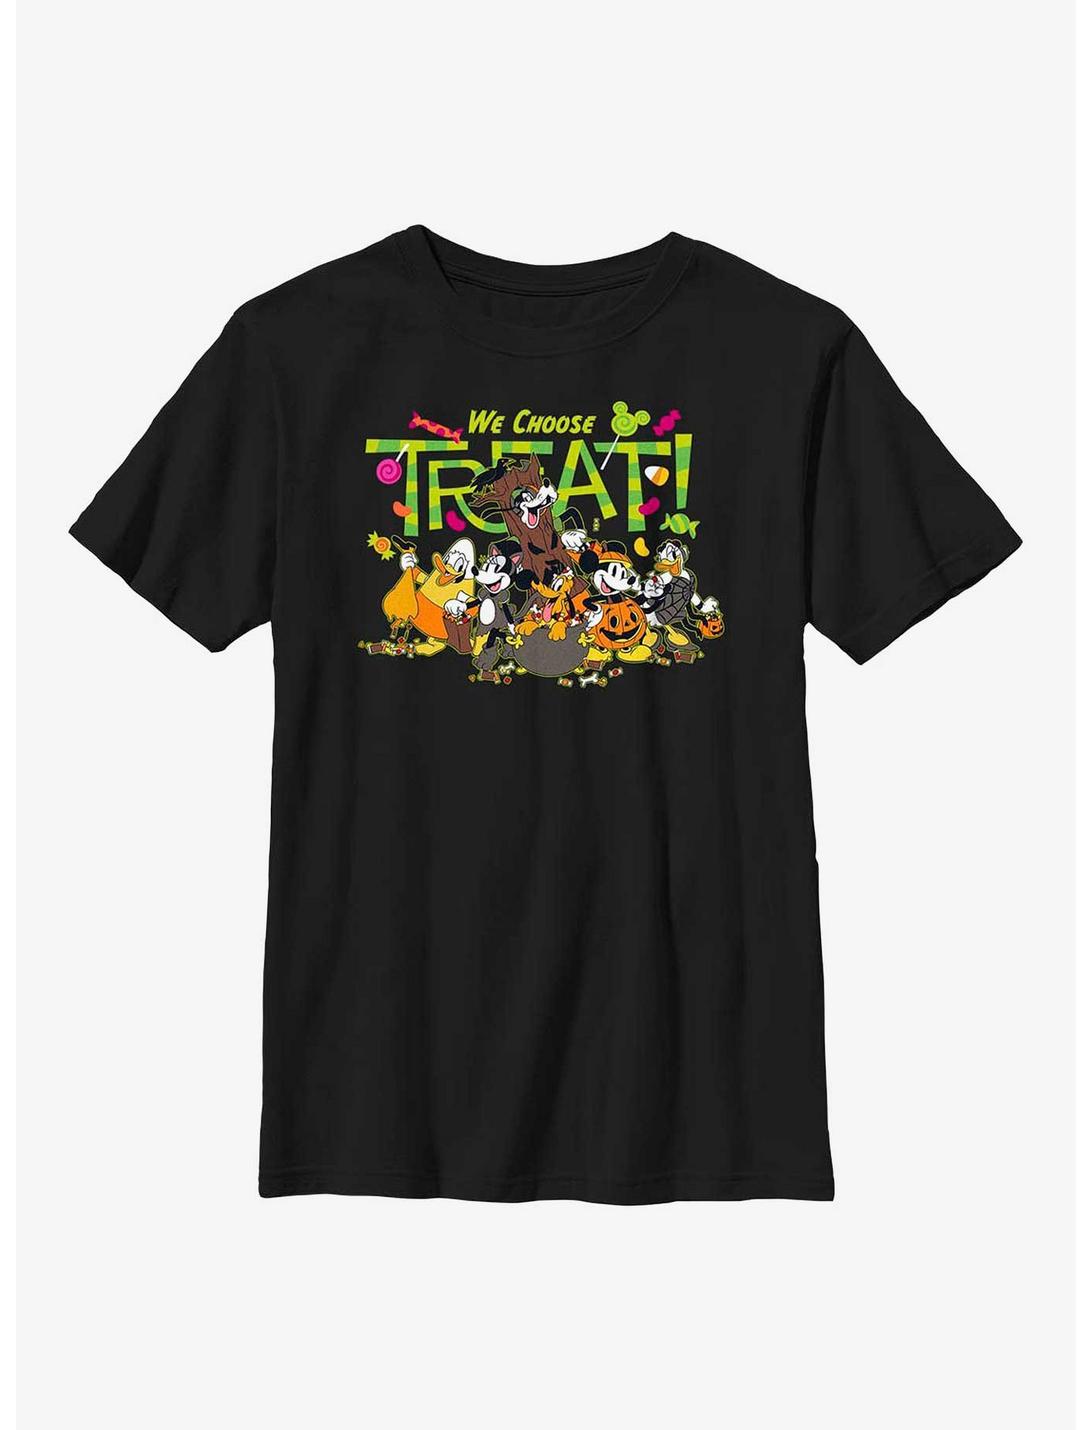 Disney Mickey Mouse & Friends We Choose Treat Youth T-Shirt, BLACK, hi-res